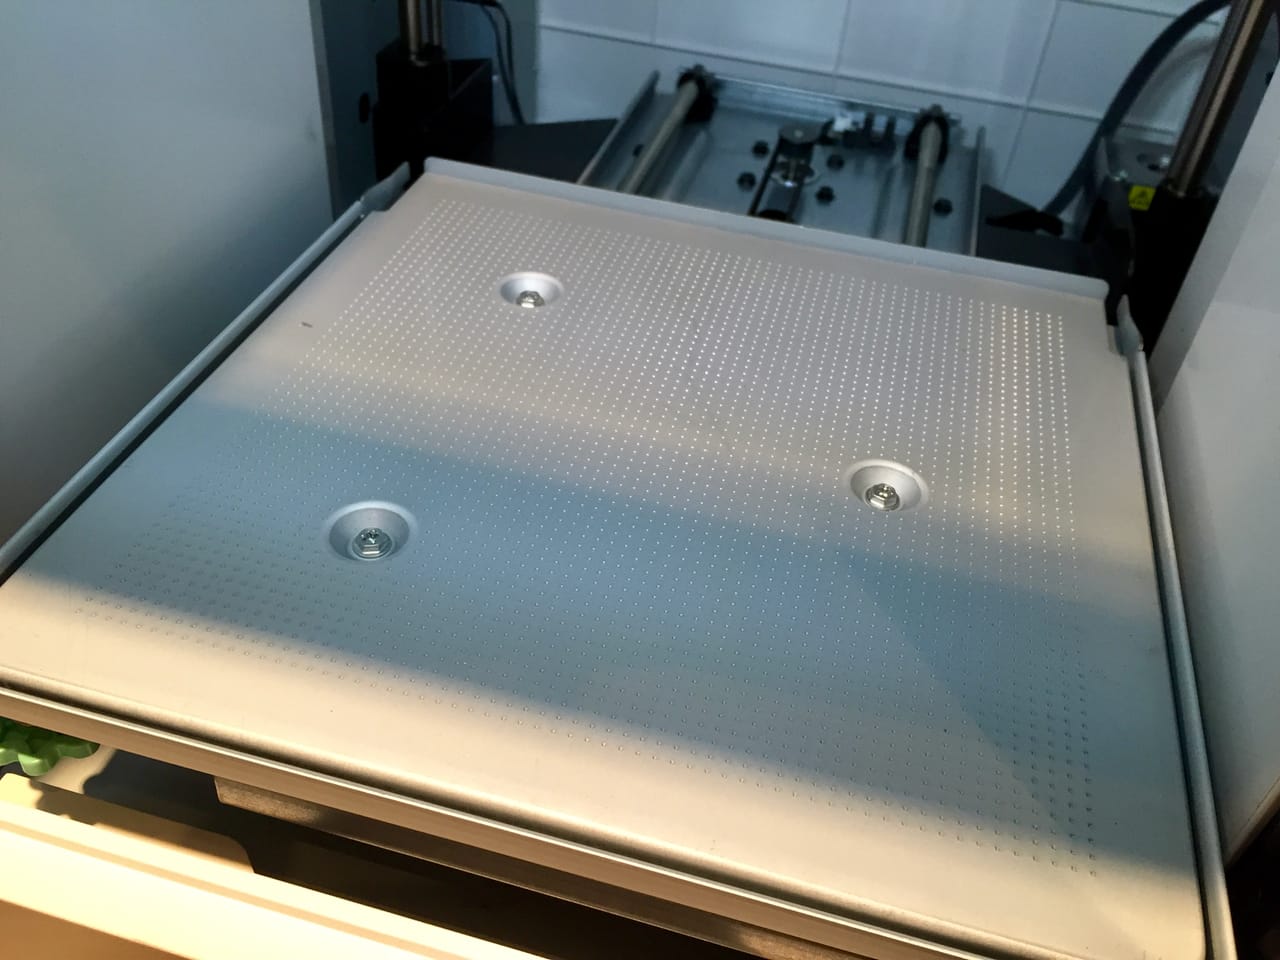  The heated build plate of the Sindoh DP201 desktop 3D printer where the magnetic surface attaches 